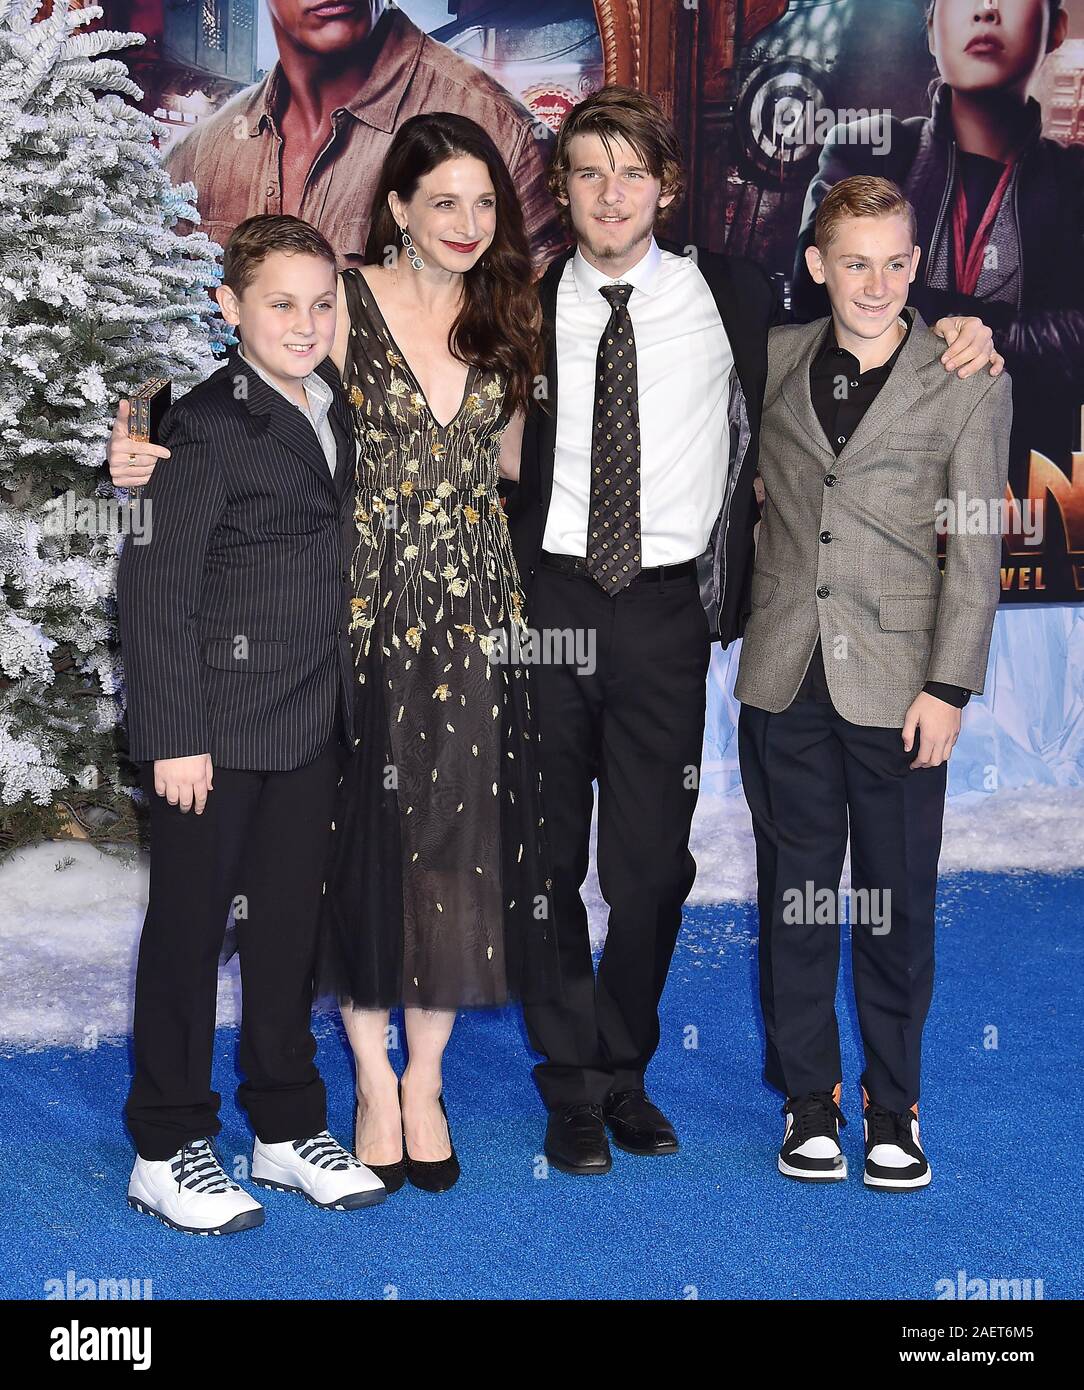 HOLLYWOOD, CA - DECEMBER 09: Marin Hinkle (2nd from L) and guests attend the premiere of Sony Pictures' 'Jumanji: The Next Level' at the TCL Chinese Theatre on December 09, 2019 in Hollywood, California. Stock Photo